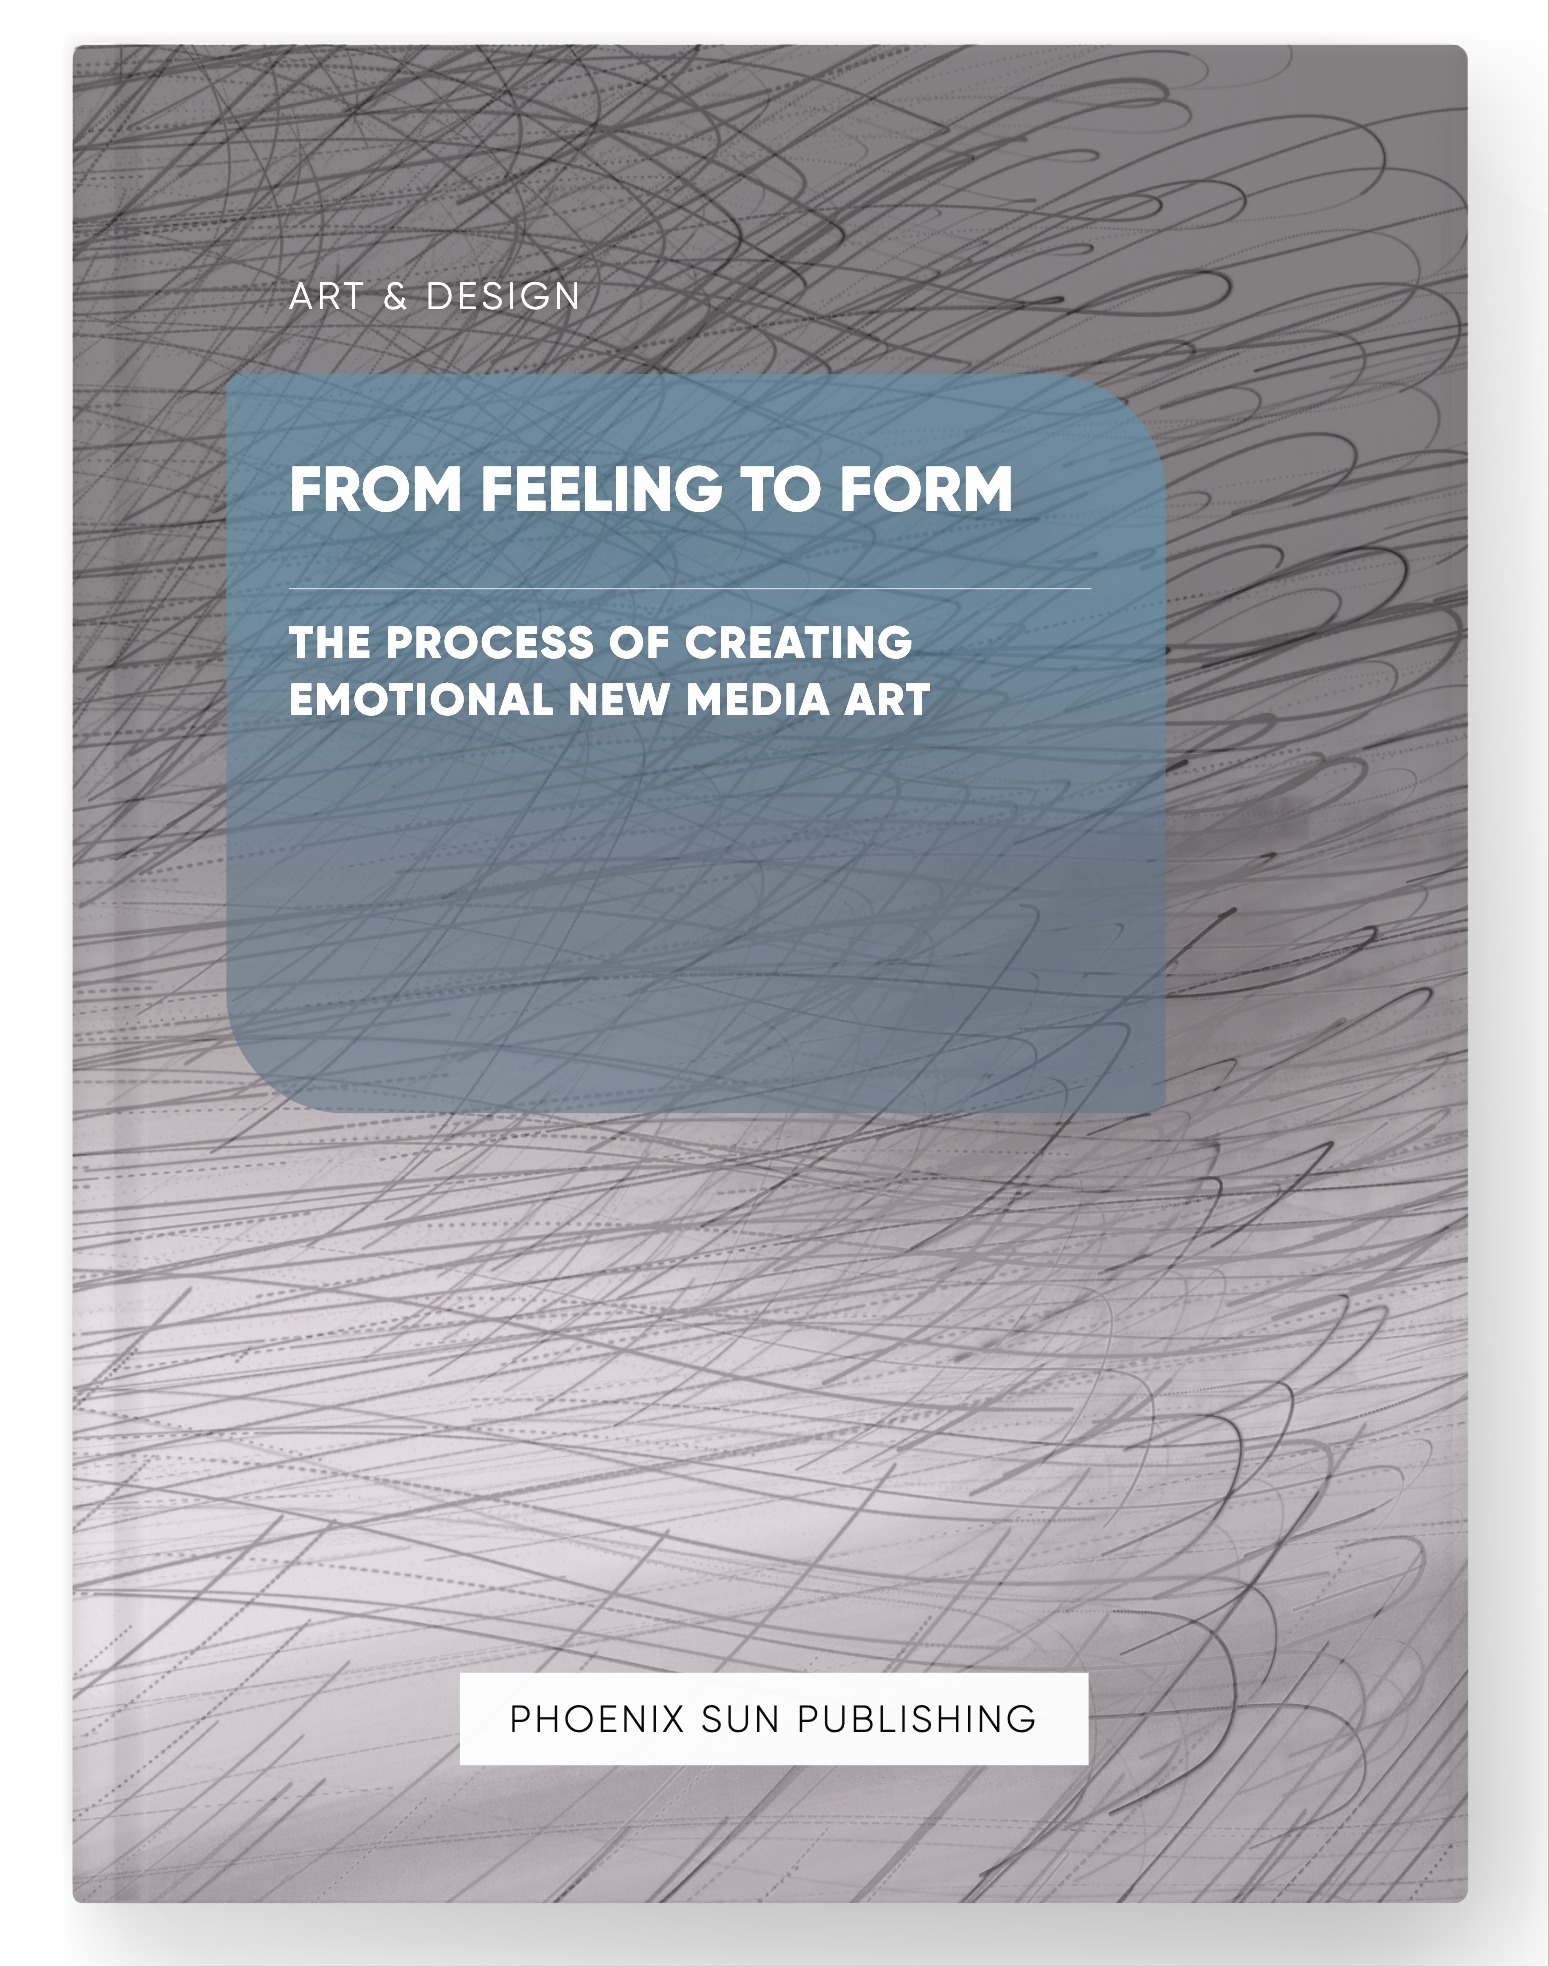 From Feeling to Form – The Process of Creating Emotional New Media Art